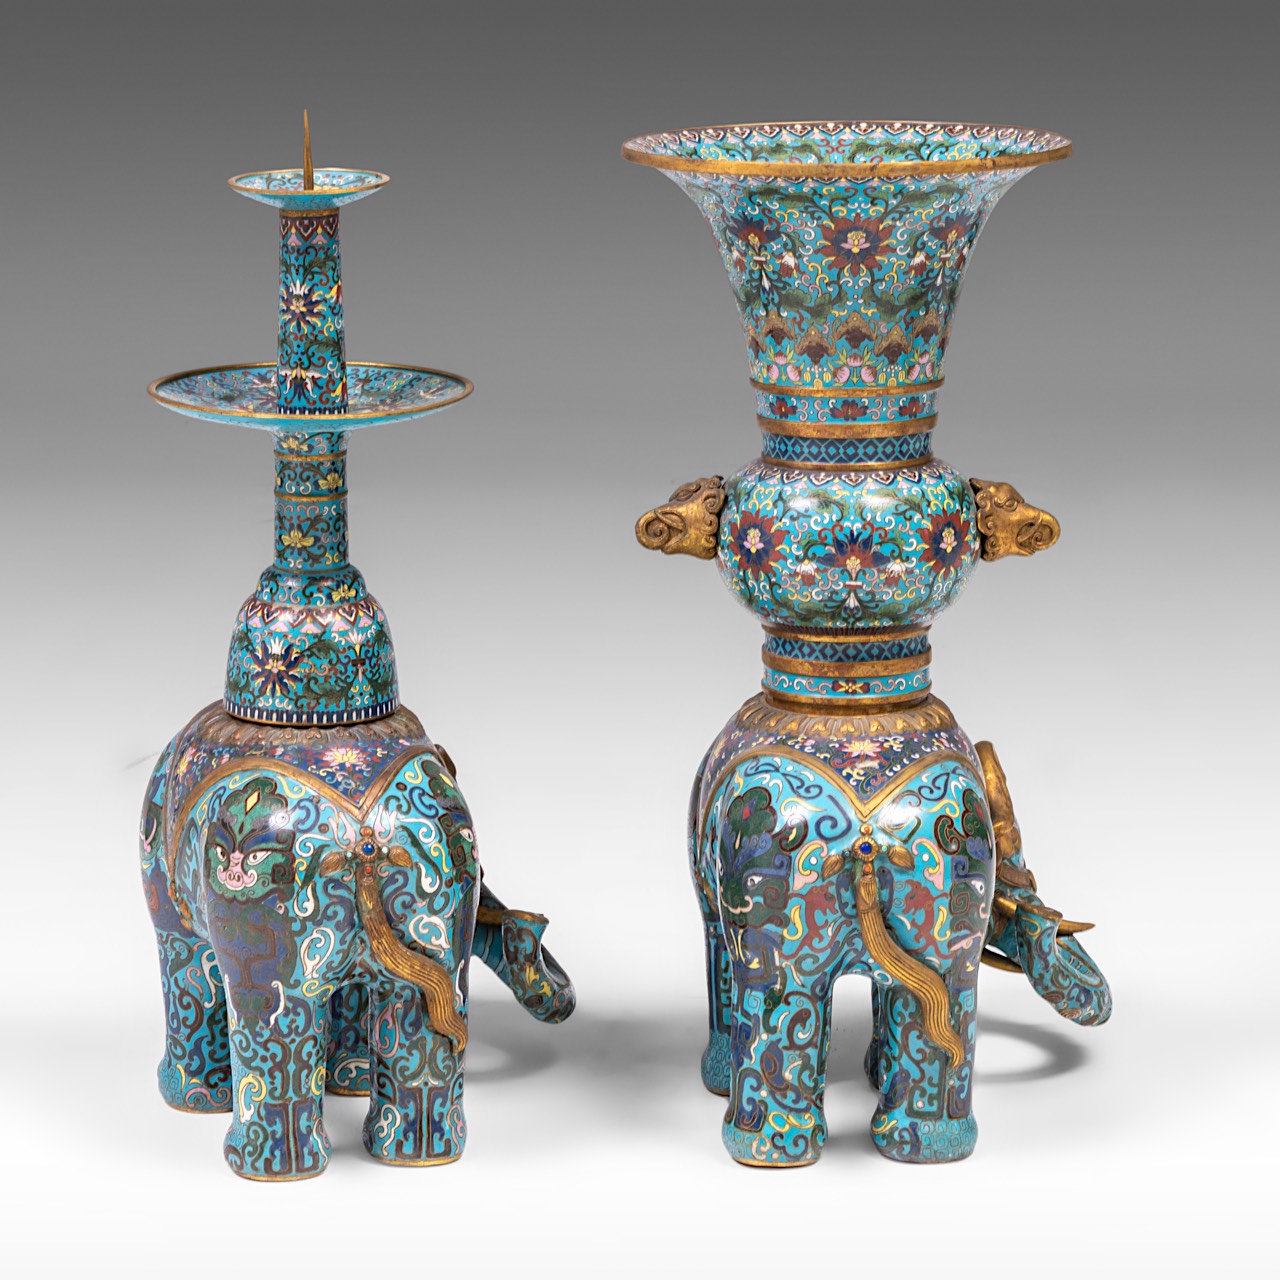 A Chinese five-piece semi-precious stone inlaid cloisonne garniture, late Qing/20thC, tallest H 58 - - Image 15 of 24